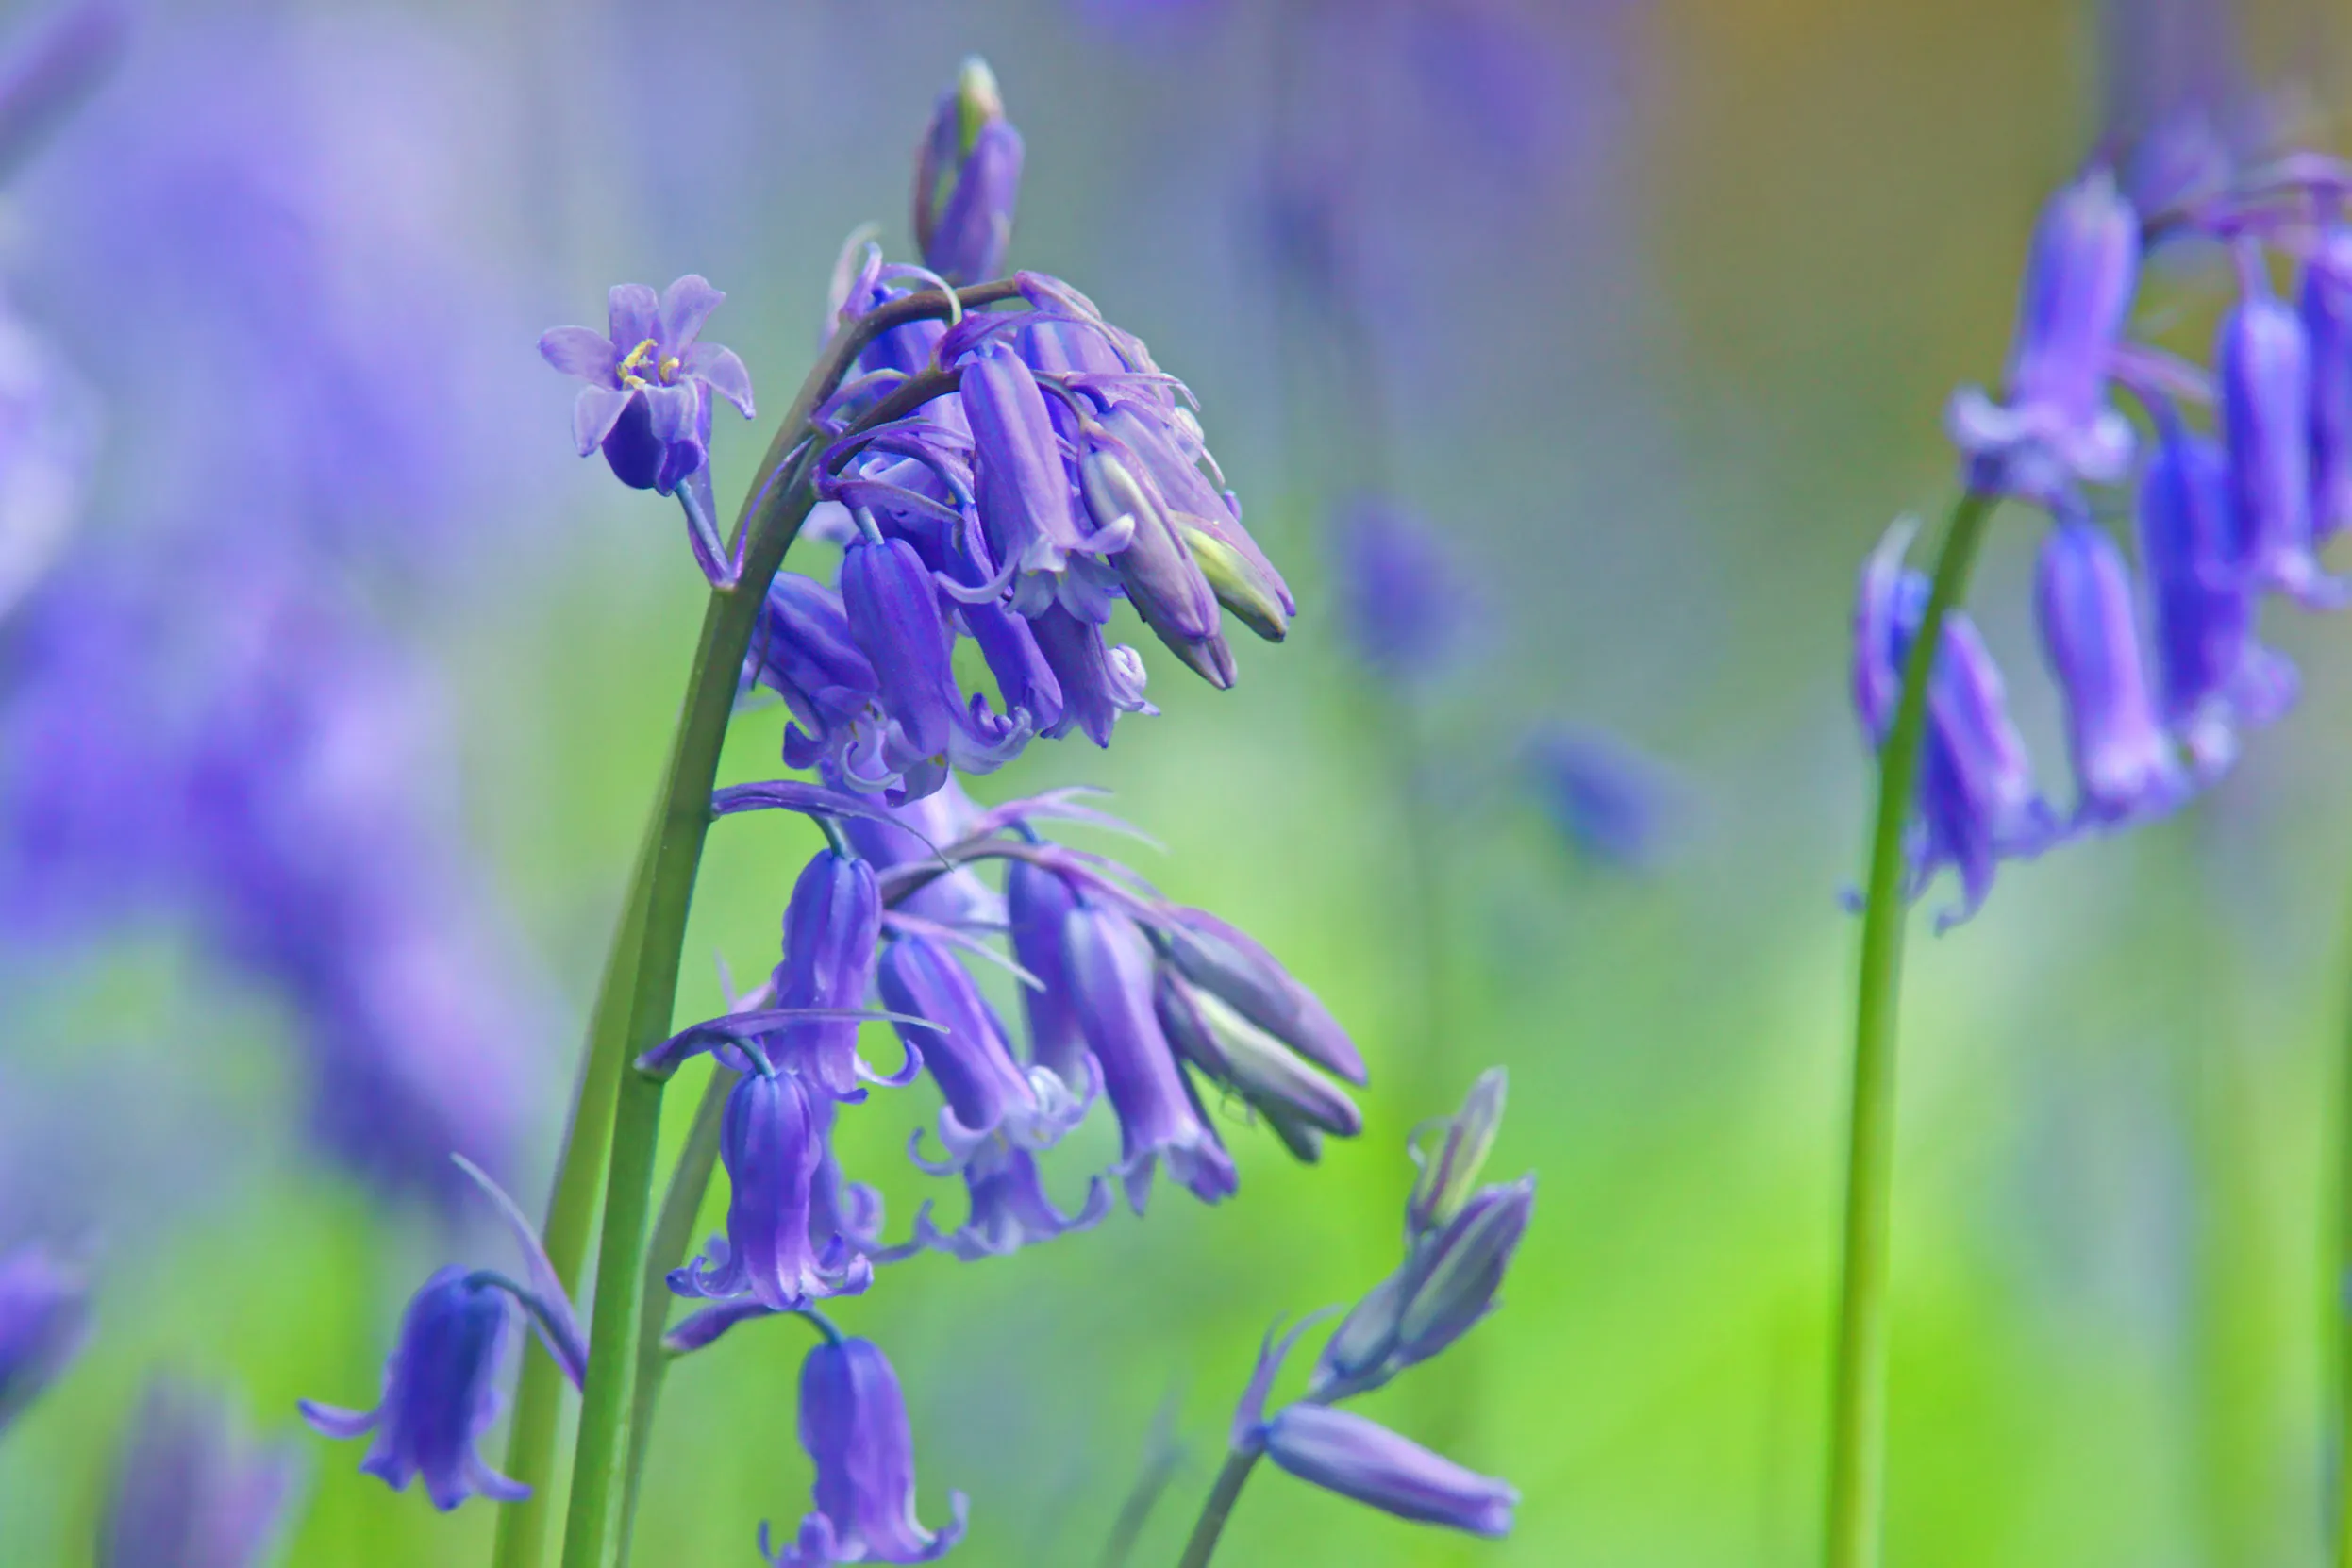 A cluster of Bluebell flowers hanging from a single green stem, with unfocused Bluebells in the background